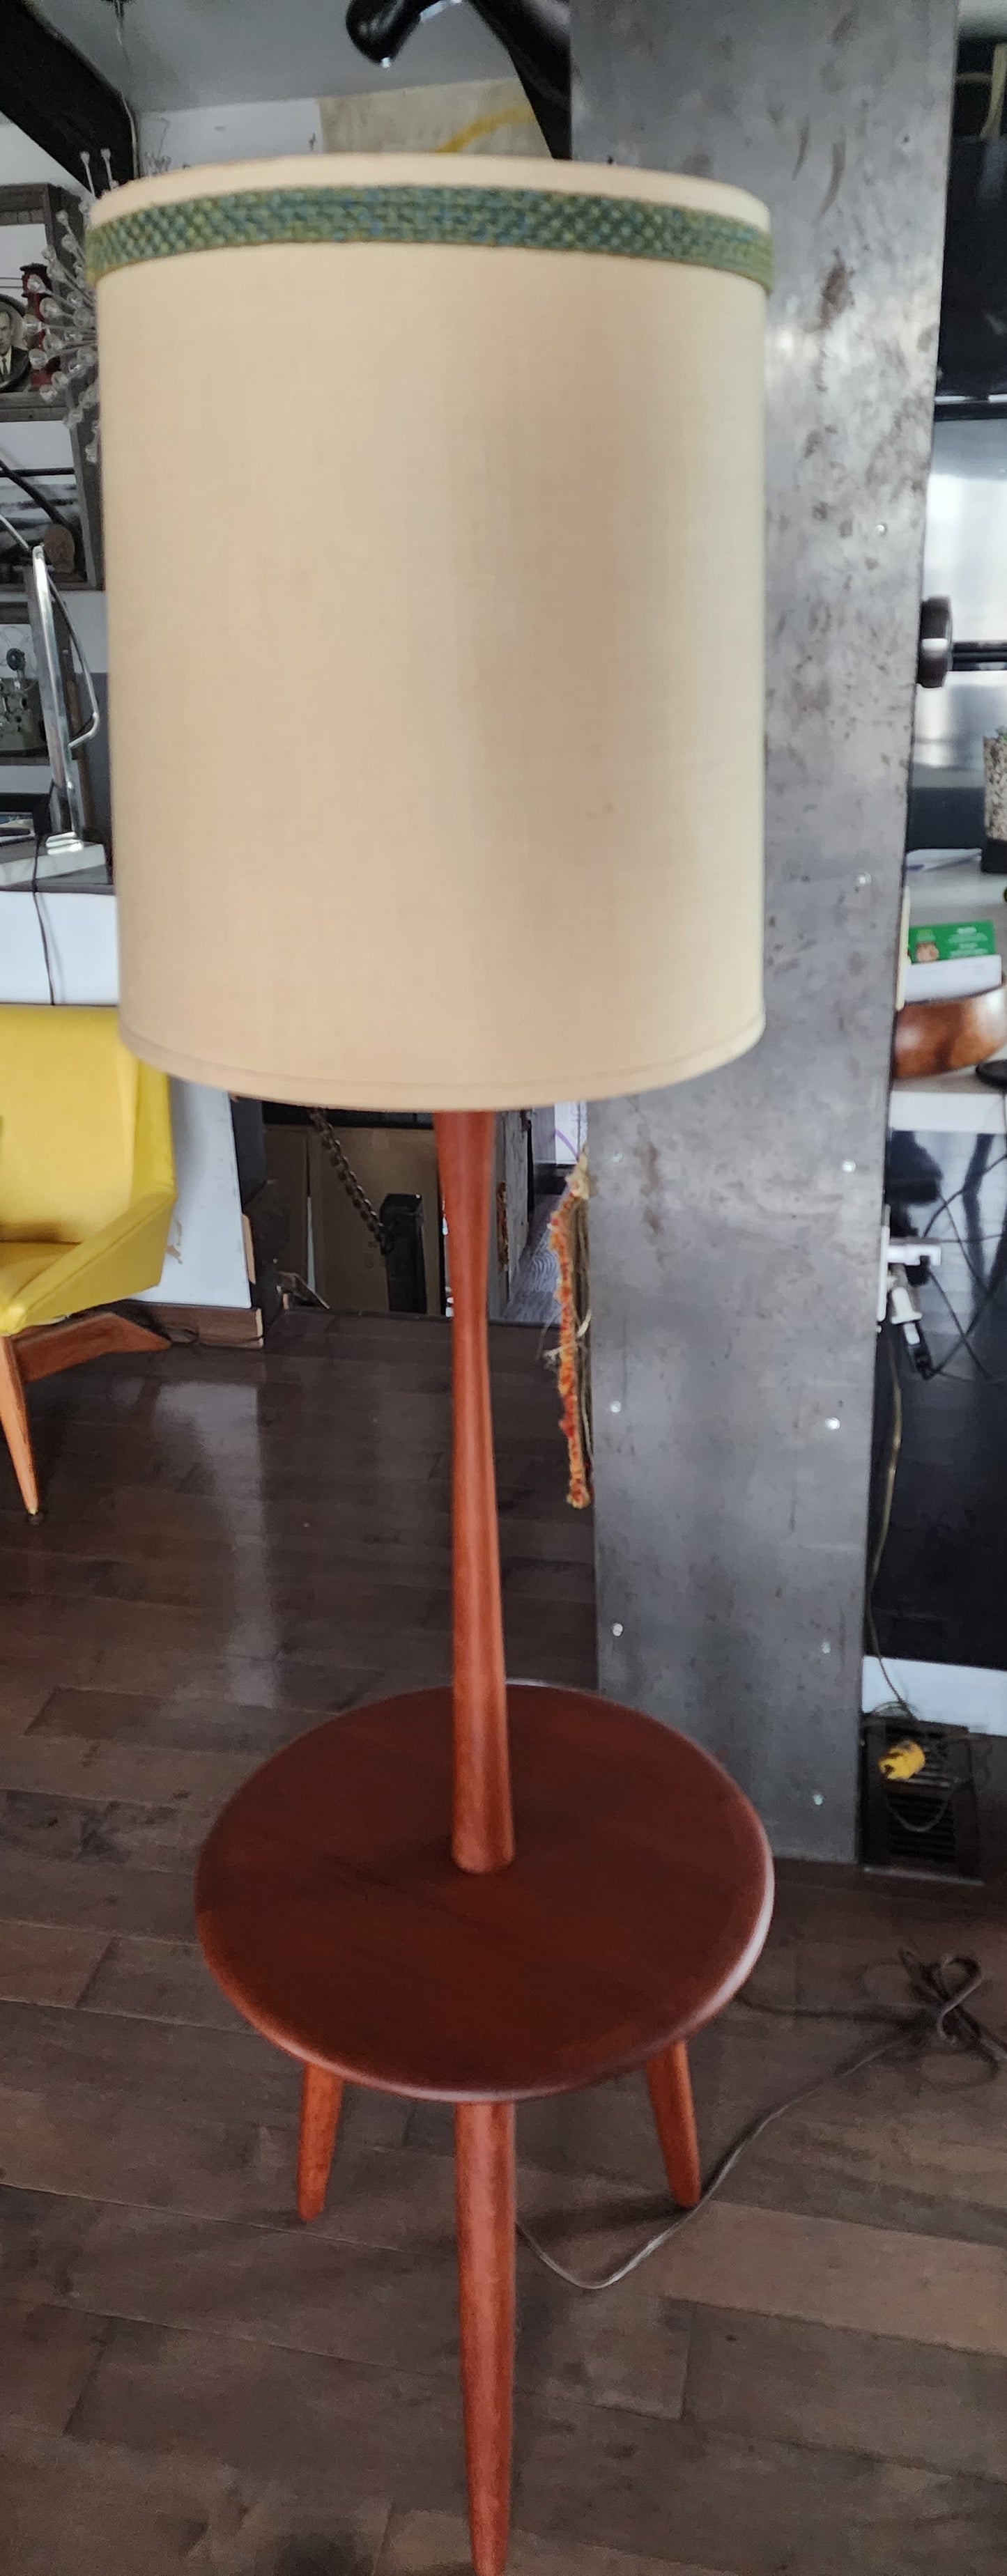 Mid Century Modern Teak Floor Lamp with Built-In Tripod Table, REFINISHED